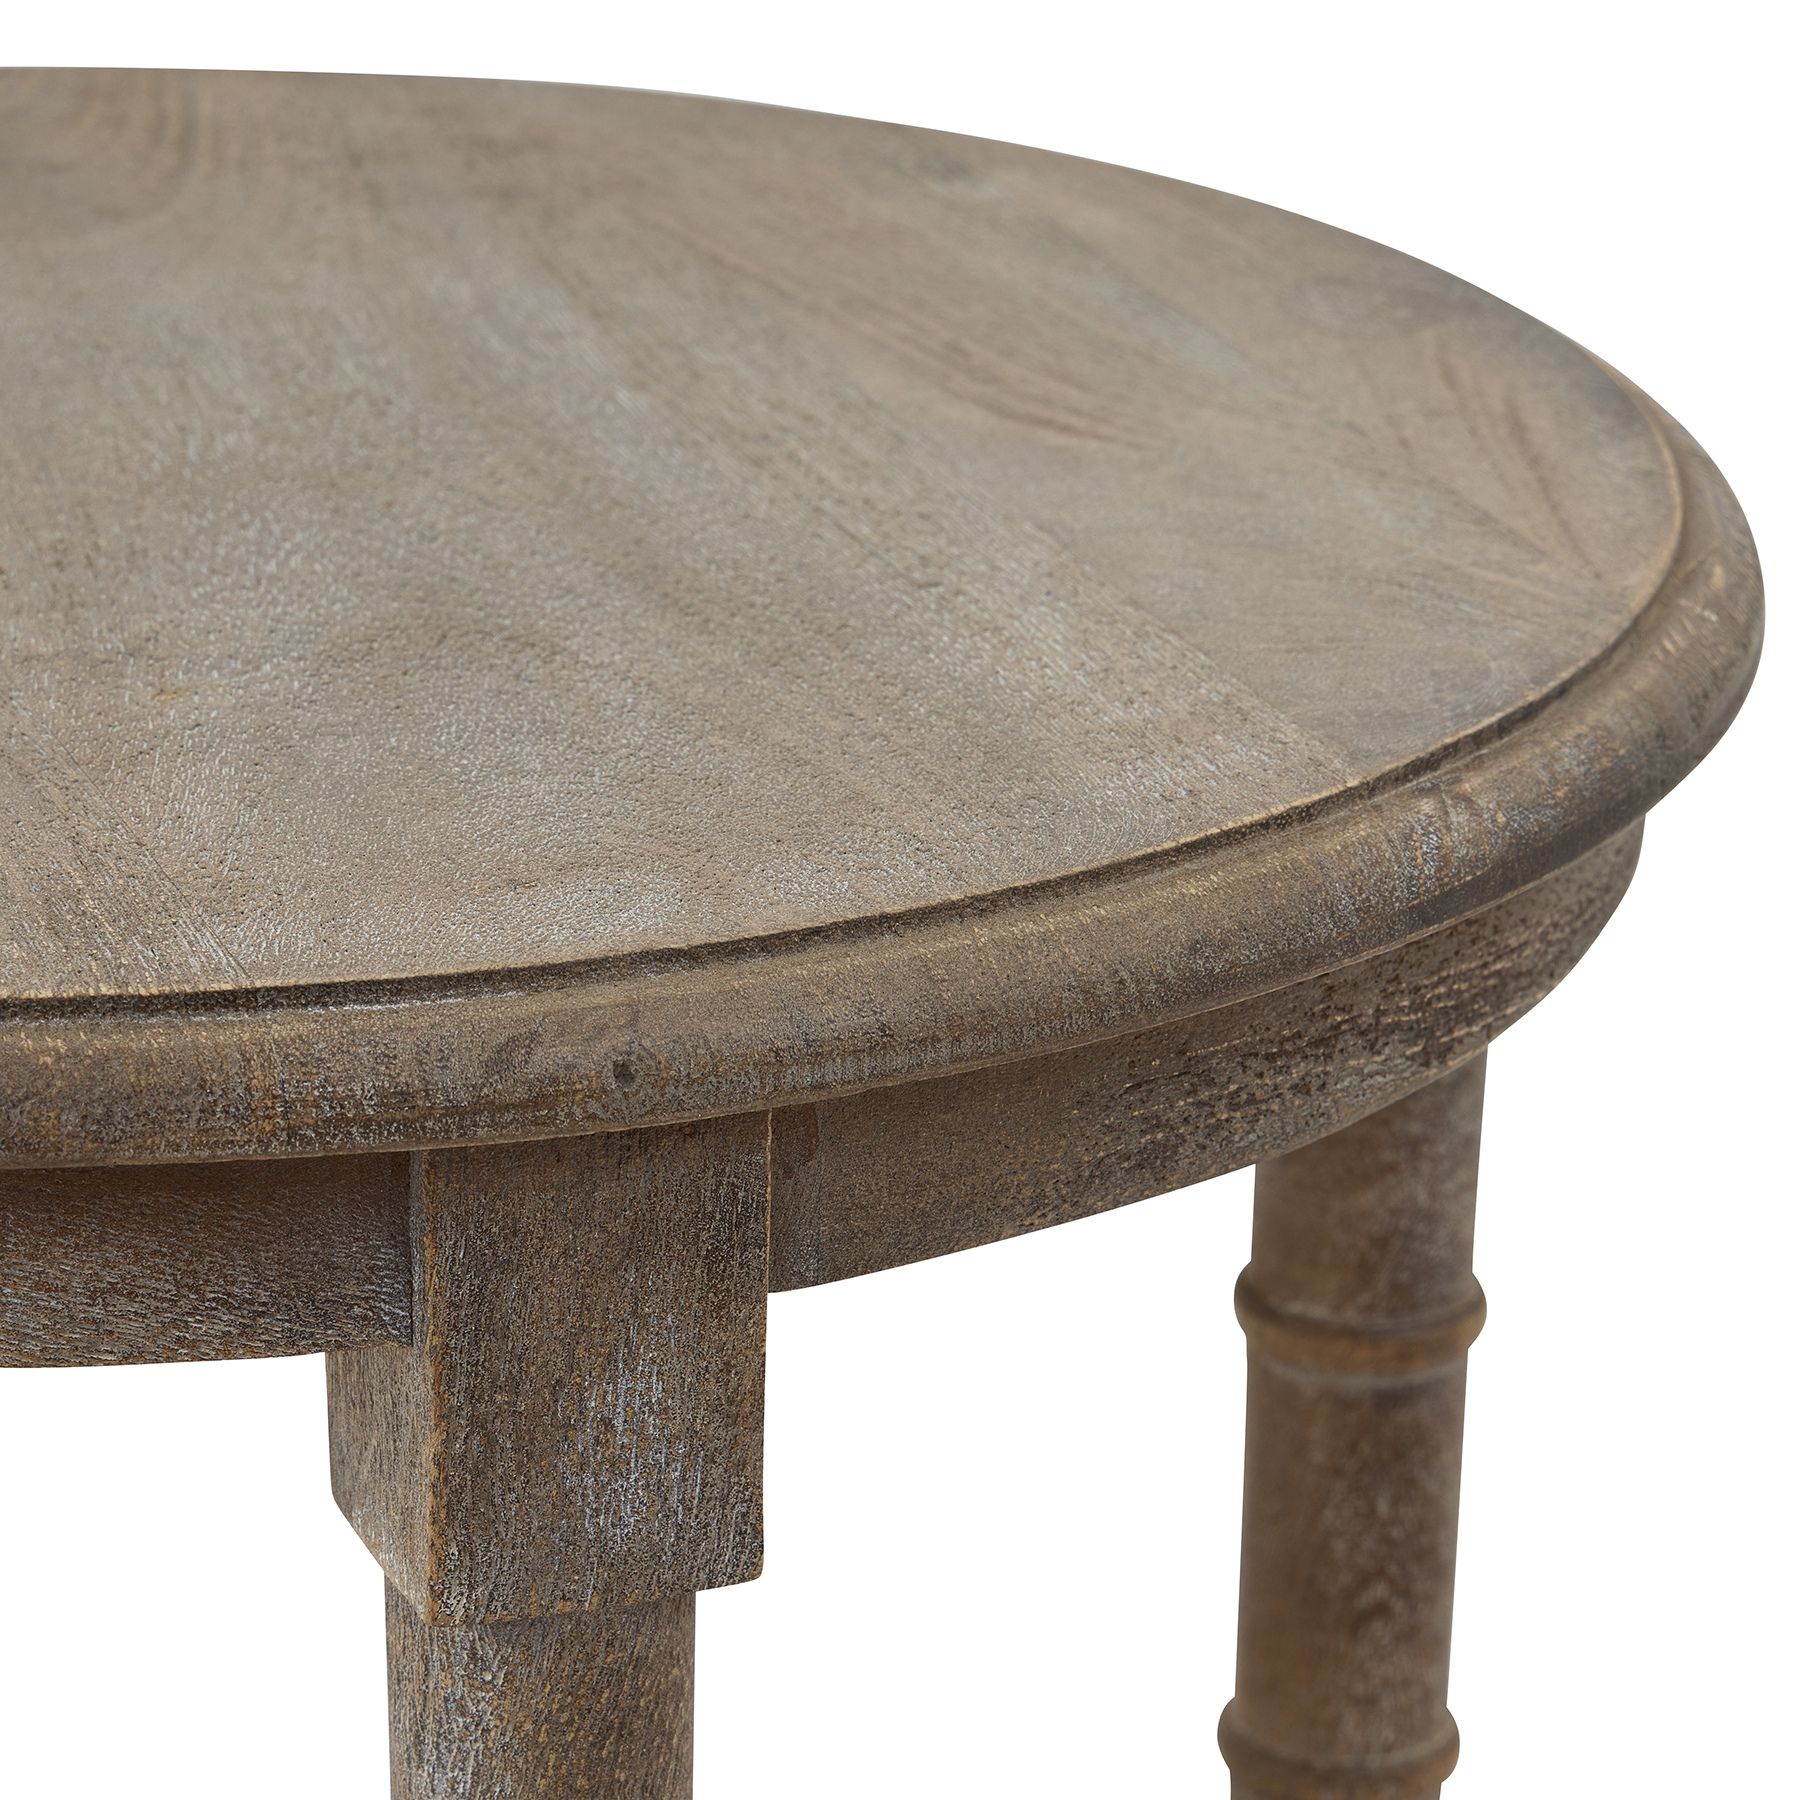 Raffles Tall Round Side Table - Image 4